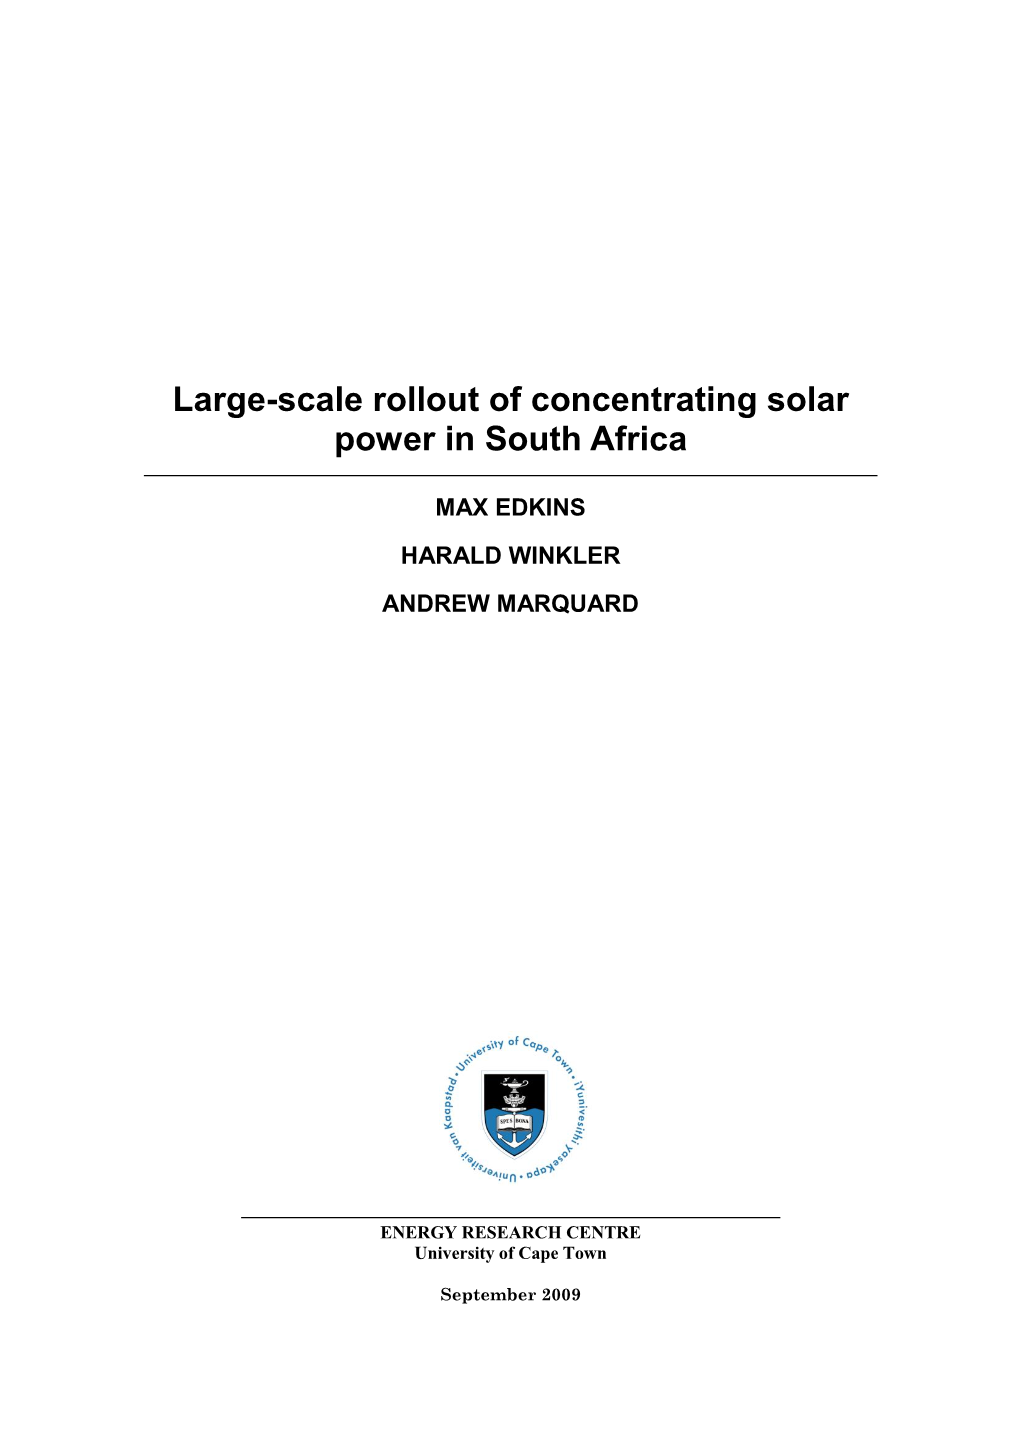 Large-Scale Rollout of Concentrating Solar Power in South Africa